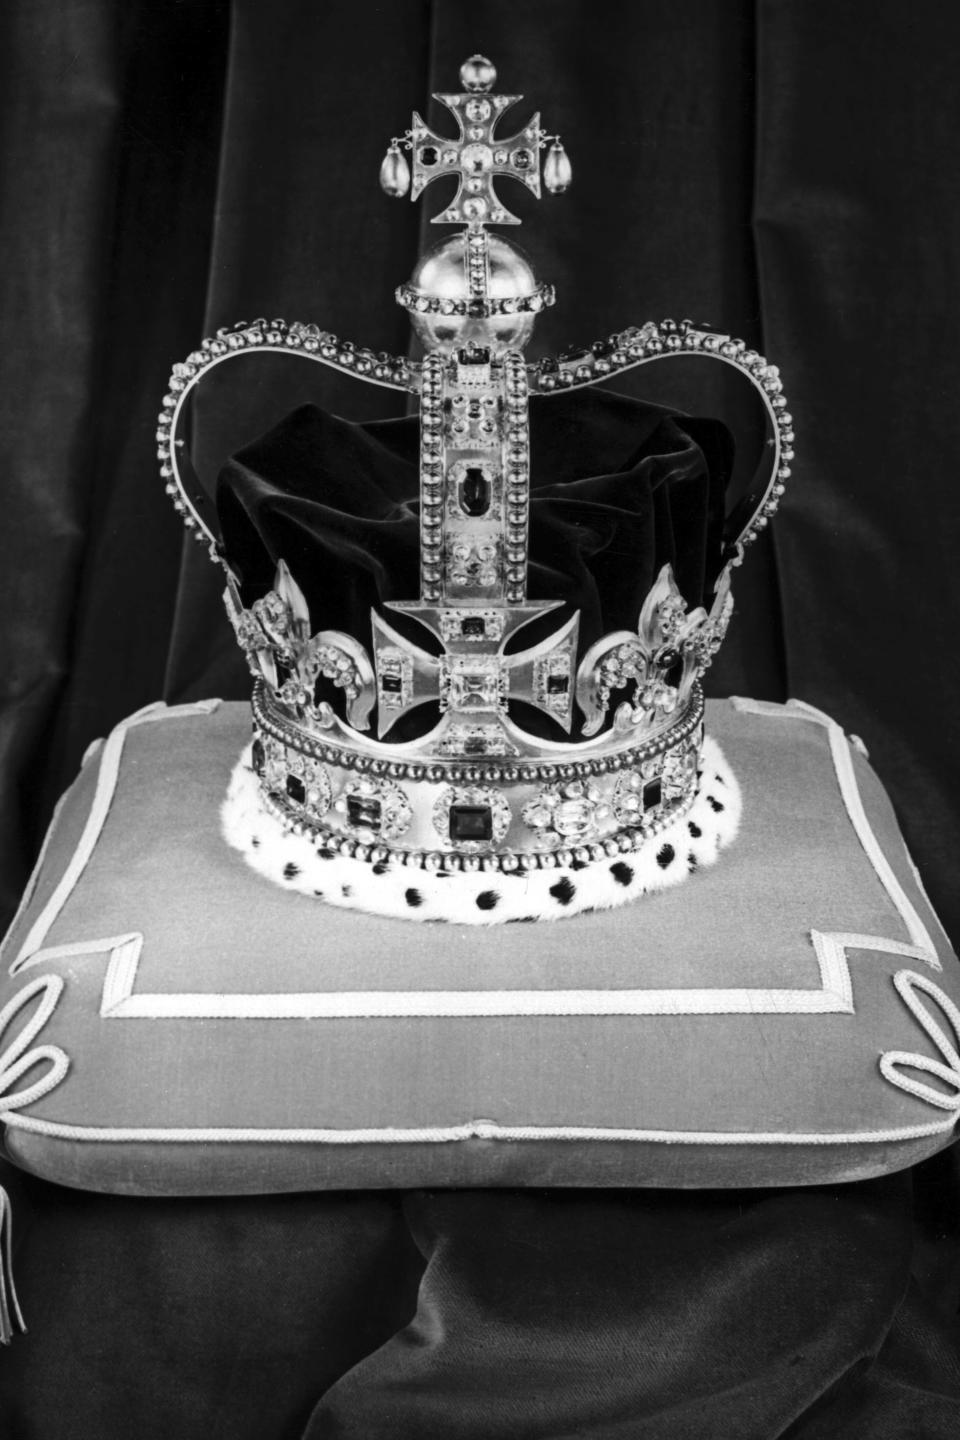 FILE - St. Edward's Crown, the official Crown of England, sits on a cushion, at the Tower of London, on Nov. 24, 1952 before being used at Queen Elizabeth II's Coronation Ceremony, on June 5, 1953. The crowning moment of King Charles III's coronation ceremony will occur, literally, when the Archbishop of Canterbury places St. Edward’s Crown on King Charles’ head. Because of its significance as the centerpiece of the coronation, this will be the only time during his reign that the monarch will wear the solid gold crown, which features a purple velvet cap, ermine band and criss-crossed arches topped by a cross. (AP Photo, File)